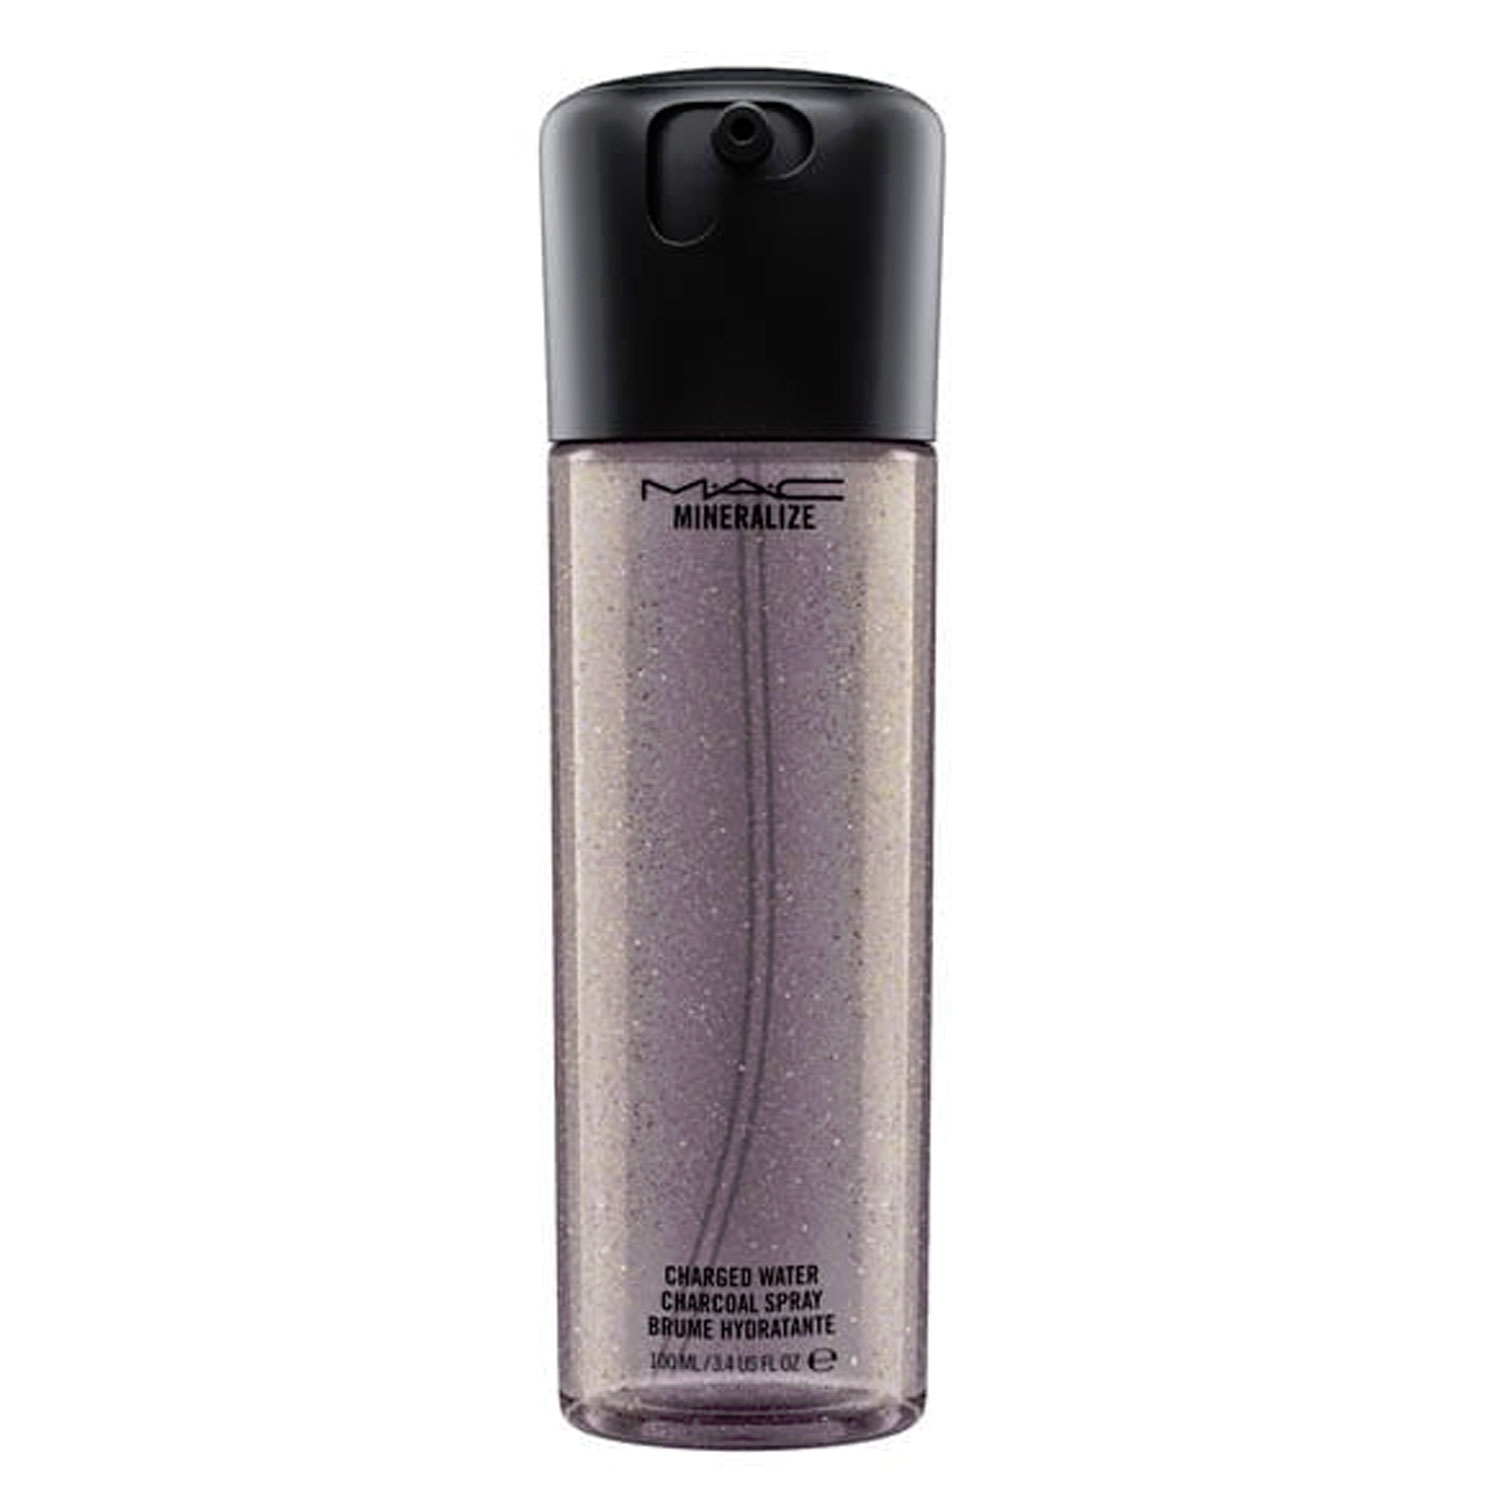 Produktbild von M·A·C Skin Care - Mineralize Charged Water Charcoal Spray